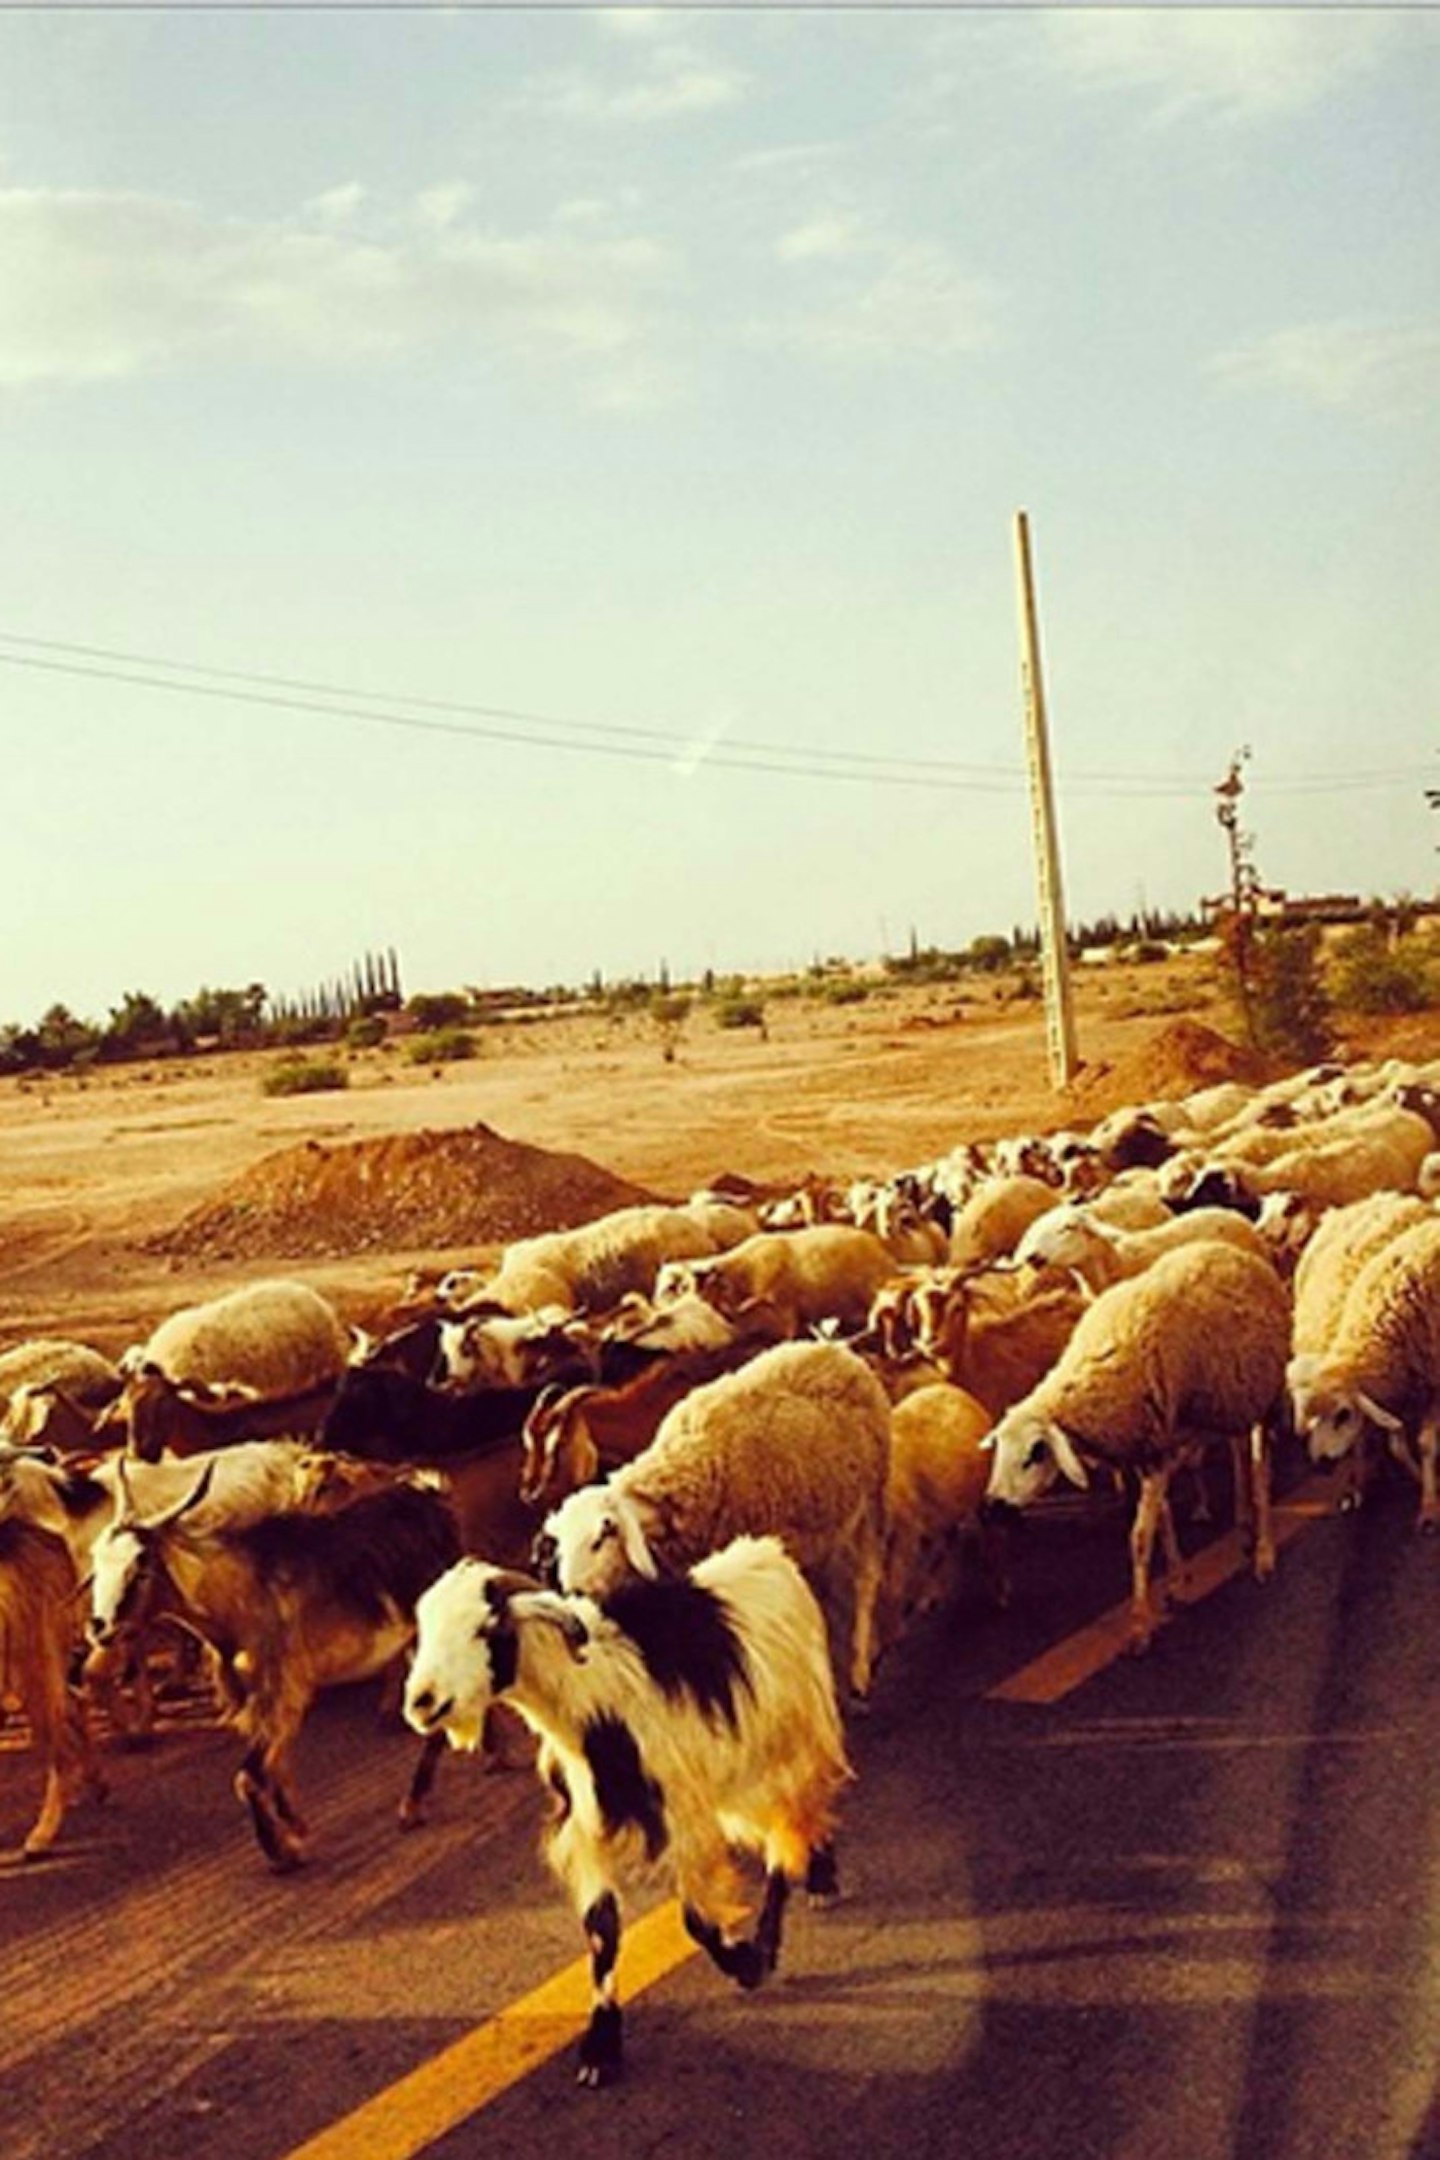 @marissamontgomery: @poppydelevingne sorry we r late for your wedding party stuck behind #sheep crossing in #marrakech